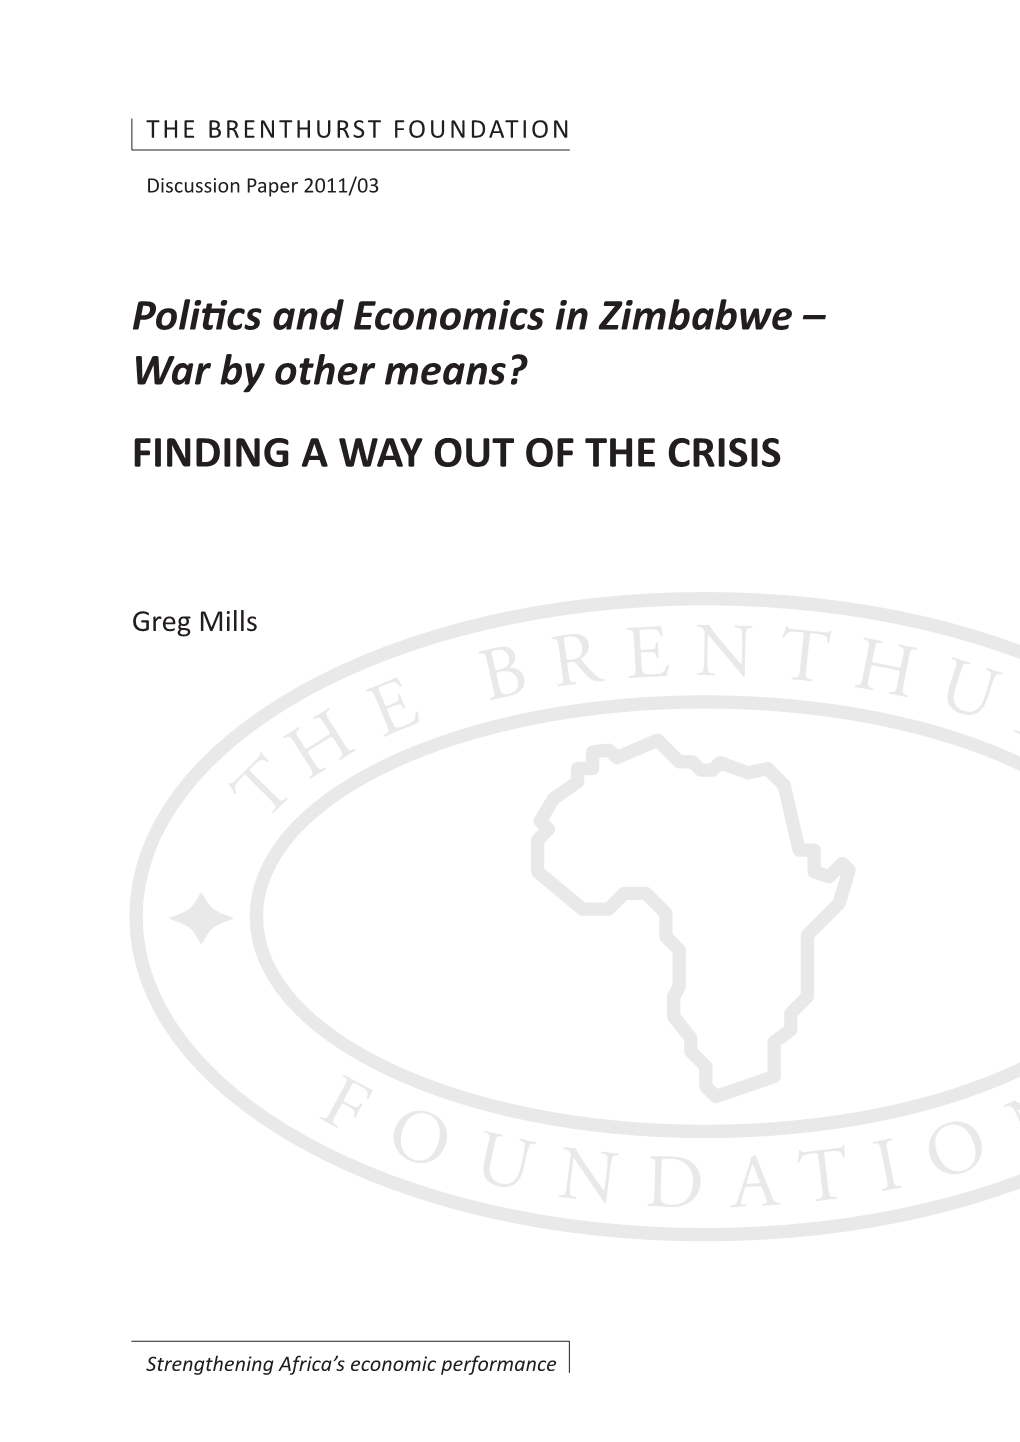 Politics and Economics in Zimbabwe – War by Other Means? FINDING a WAY out of the CRISIS